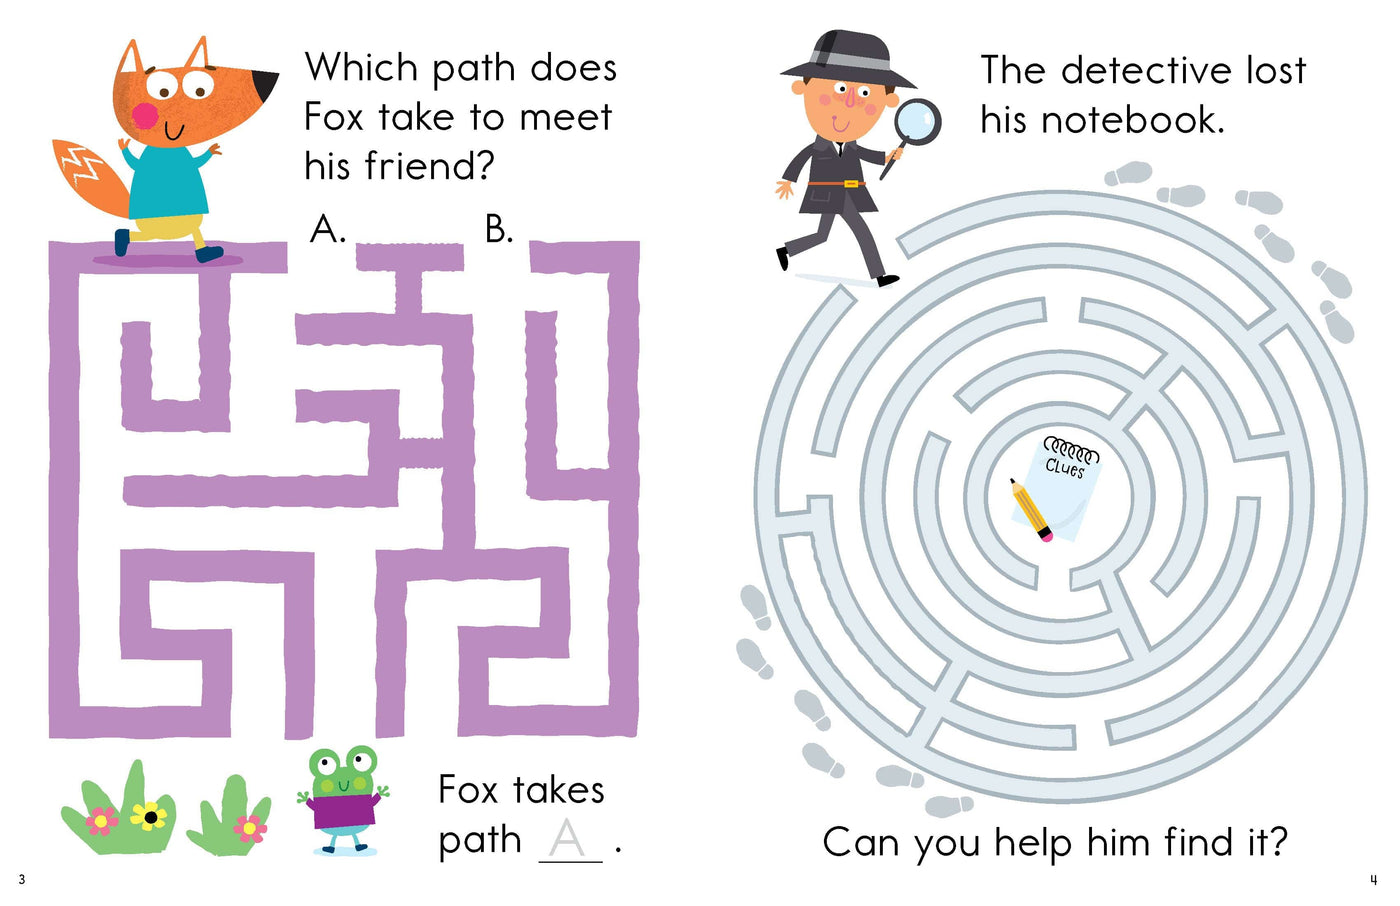 FIRST FUN: MAZES for Kids - Puzzle Activity Book for Preschool - Discovery Toys